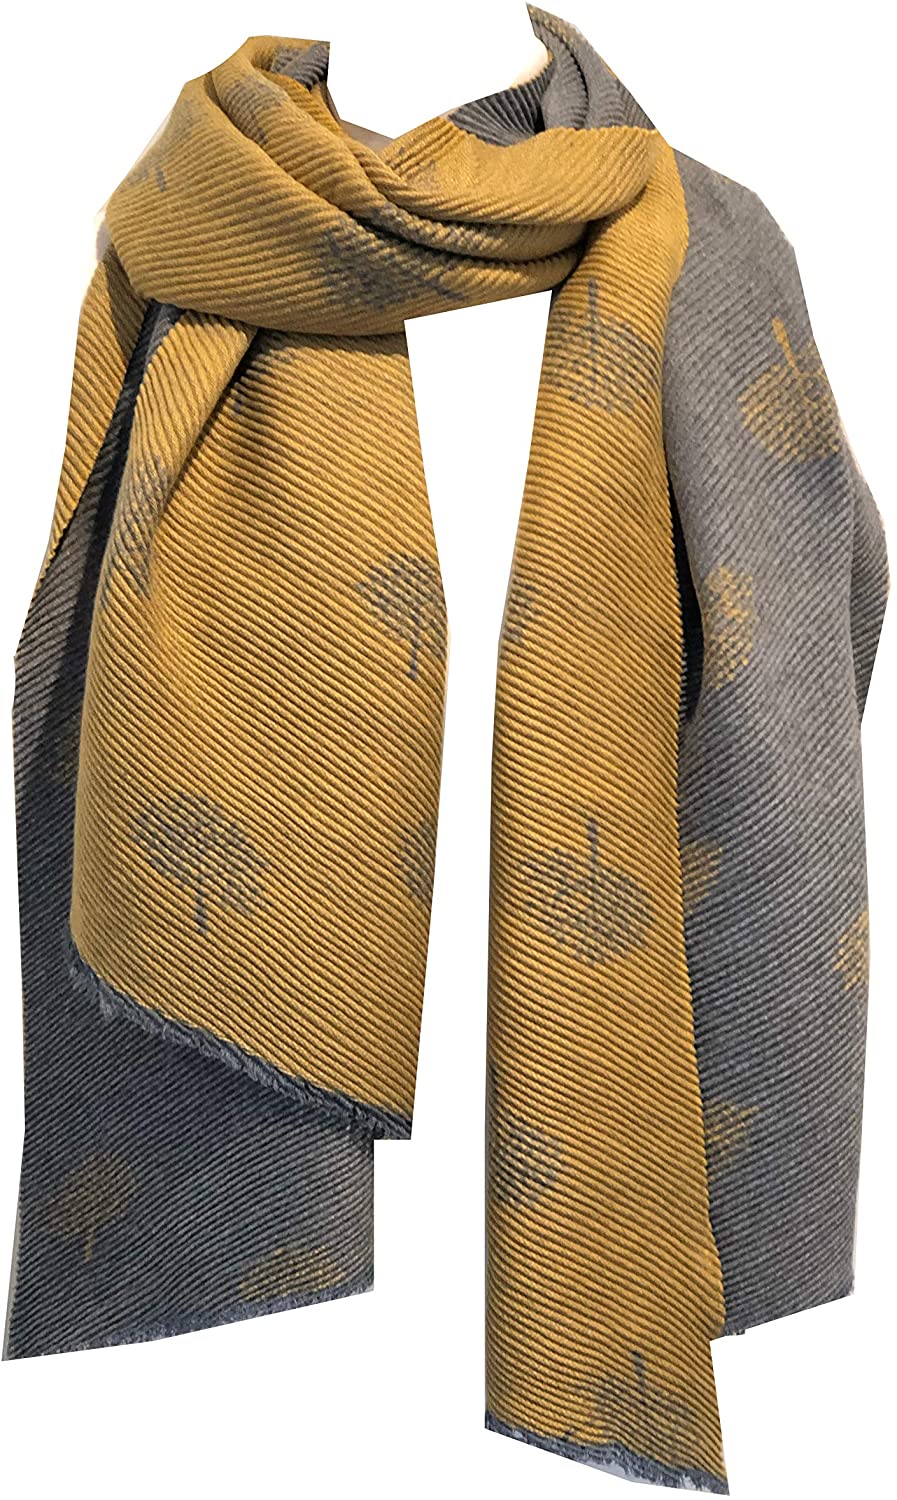 Pamper Yourself Now Women's Reversible Two Tone Blanket Pleated Winter/Autumn Scarf wrap Shawl with Mulberry Trees. Great for Gifts. (Grey/Mustard)